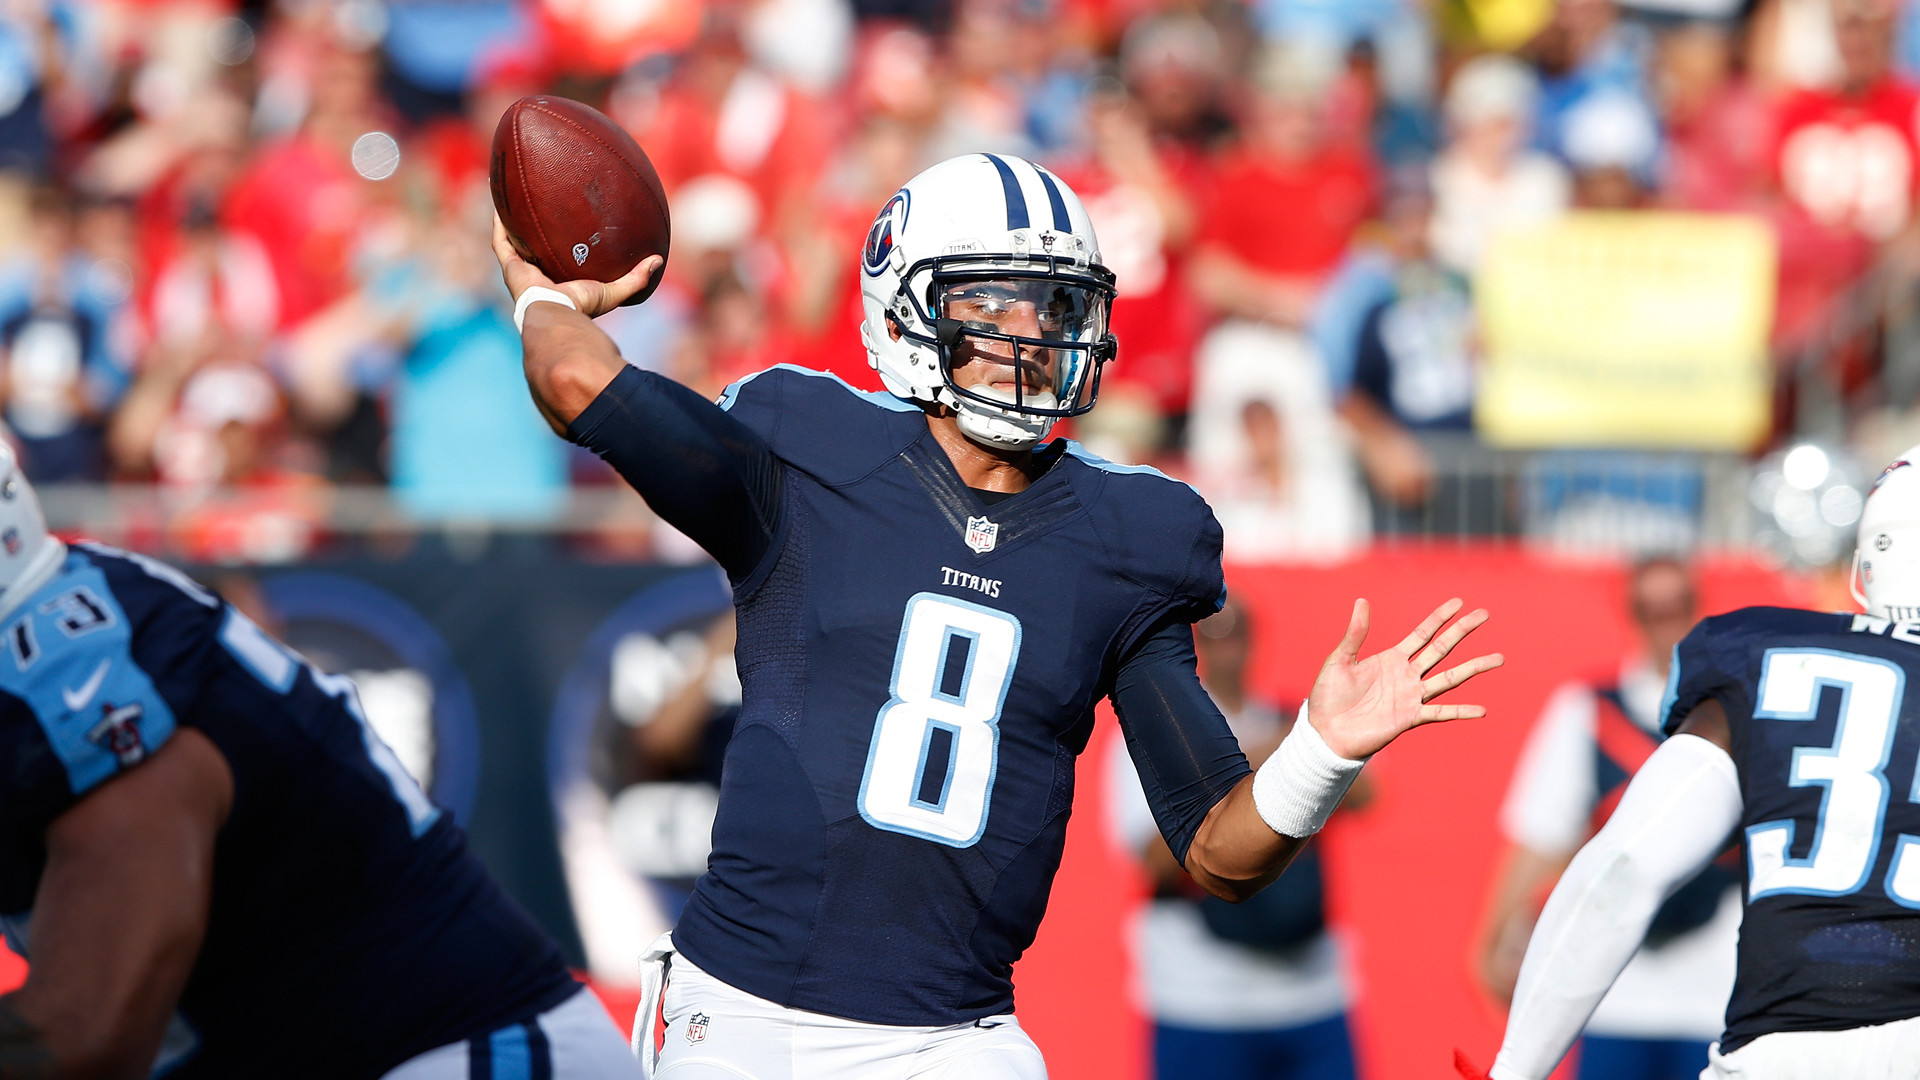 1920x1080 marcus mariota tennessee titans wallpaper - photo #41. Marcus Mariota threw  four touchdown passes in the first half as he led .